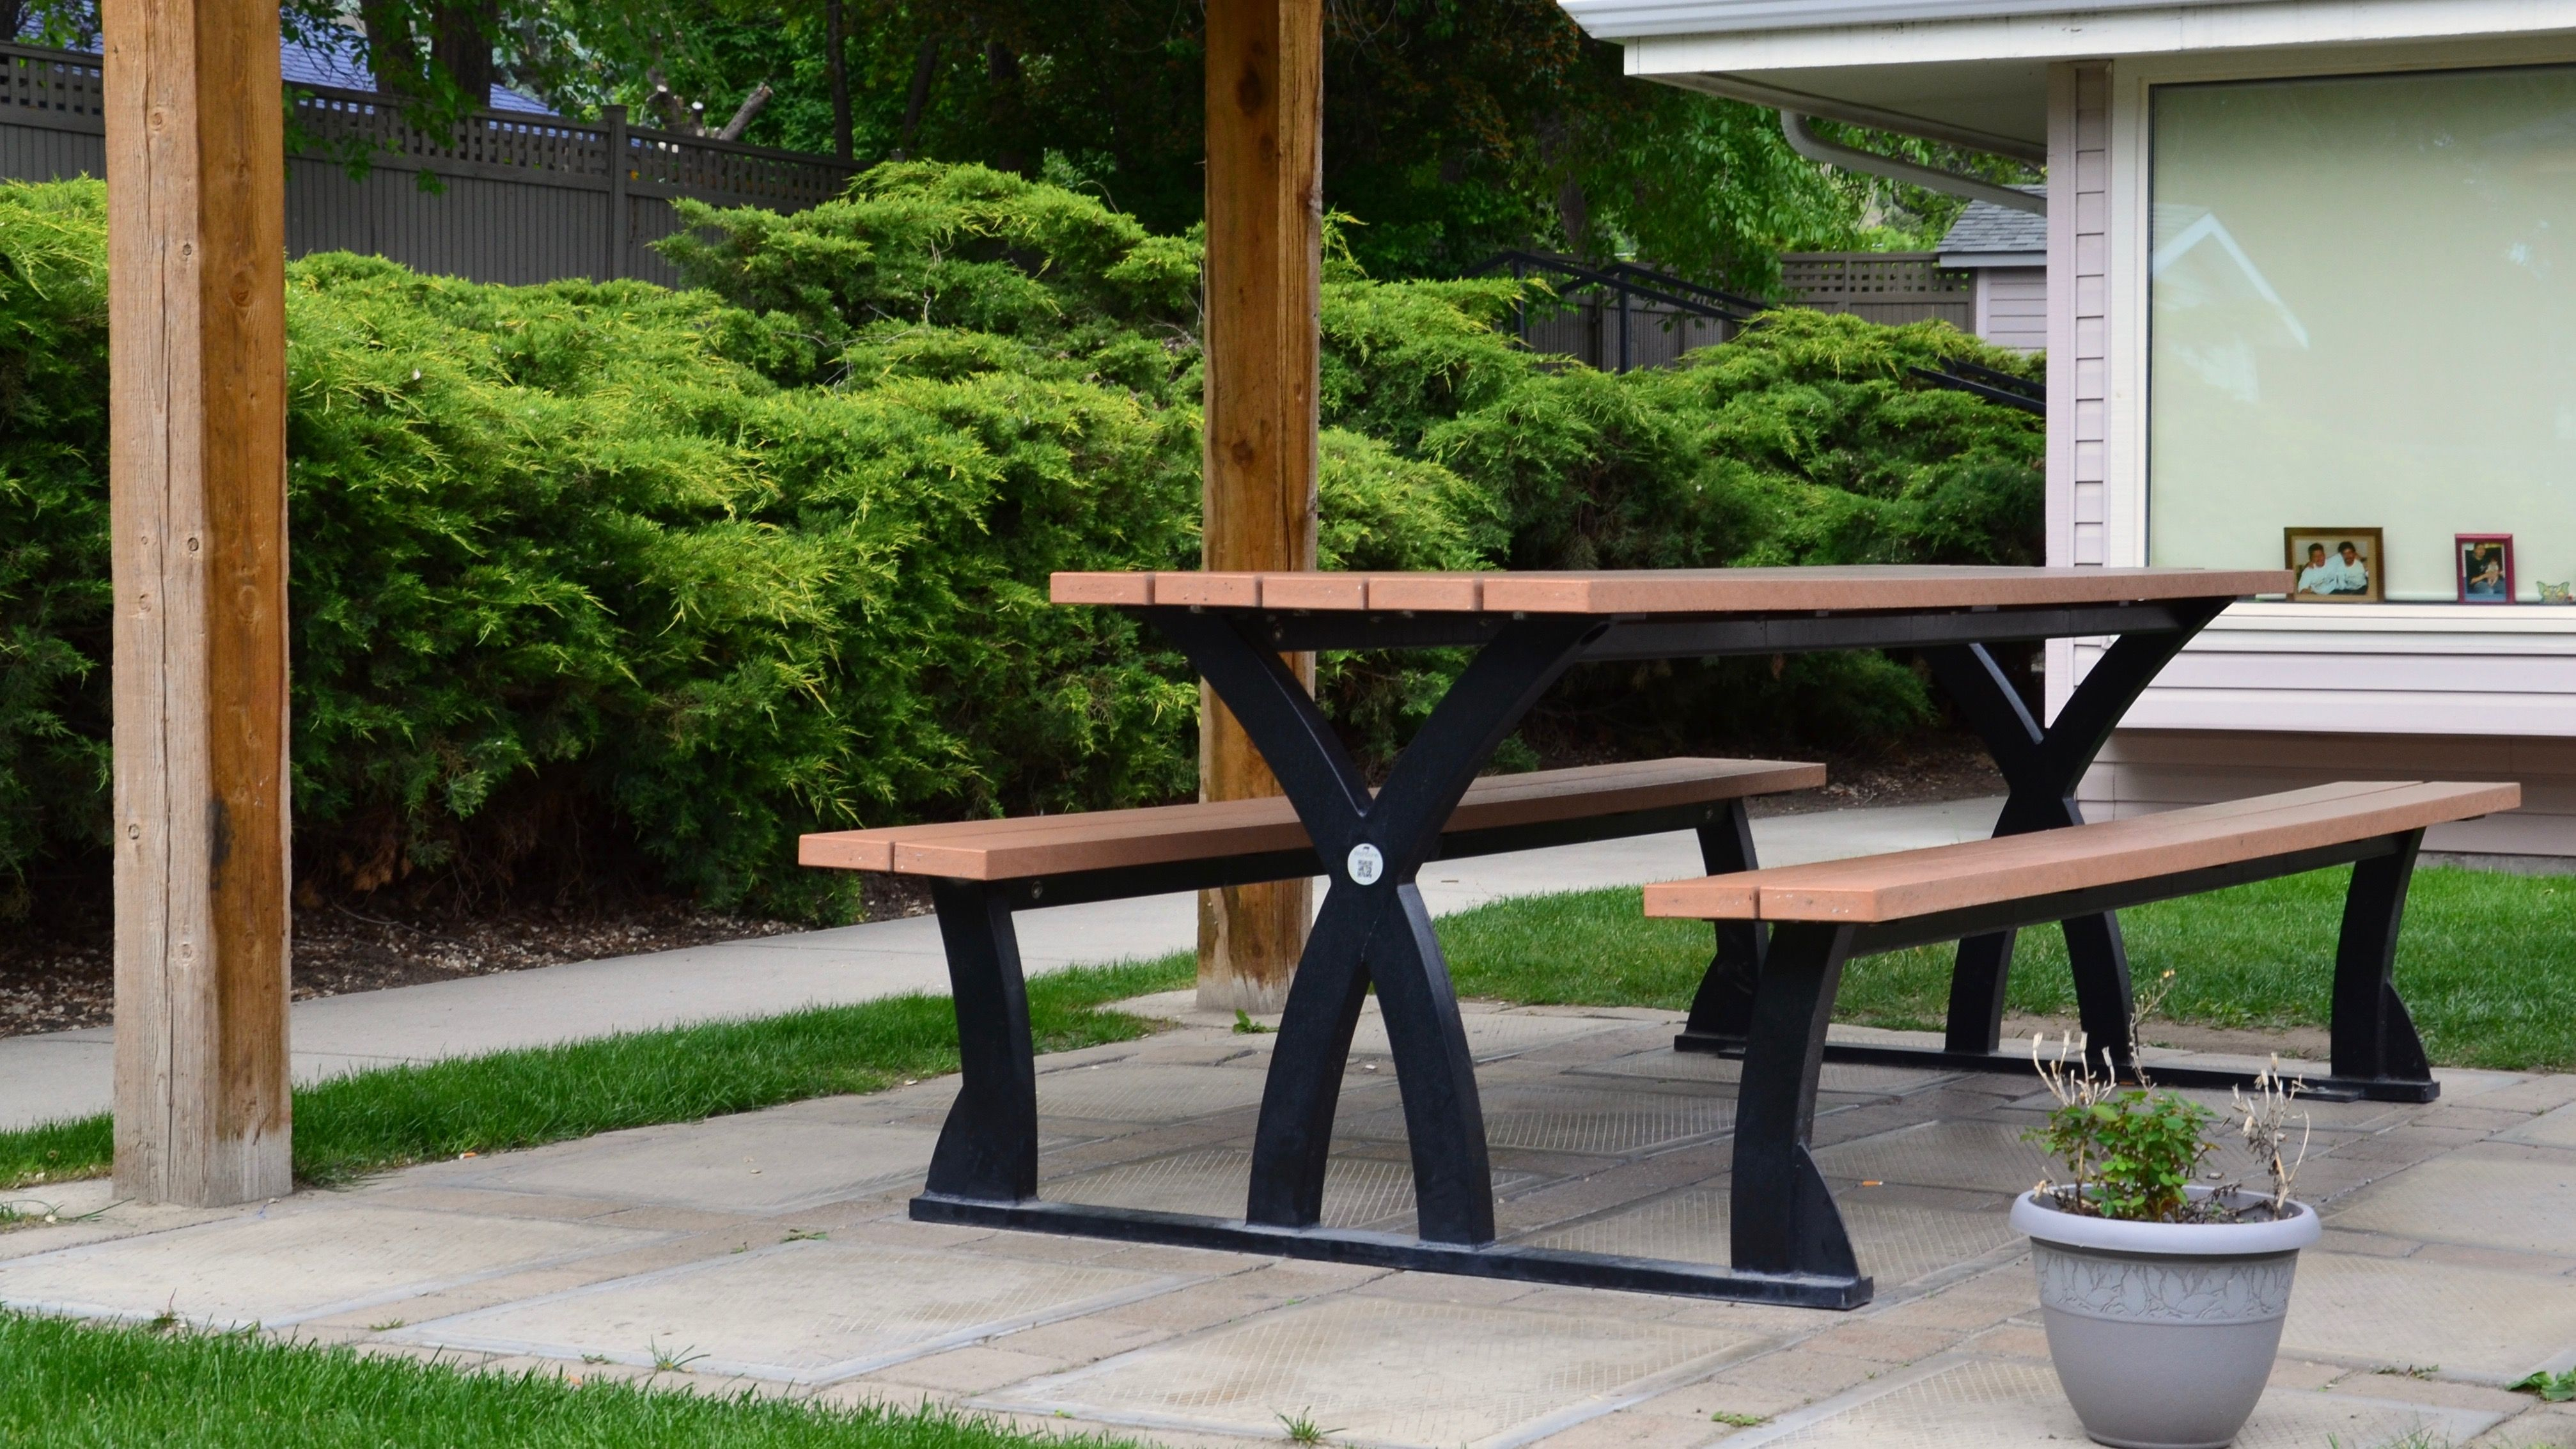 Wishbone 8 Ft Parker Picnic Table At Braemore Lodge In intended for sizing 4029 X 2266